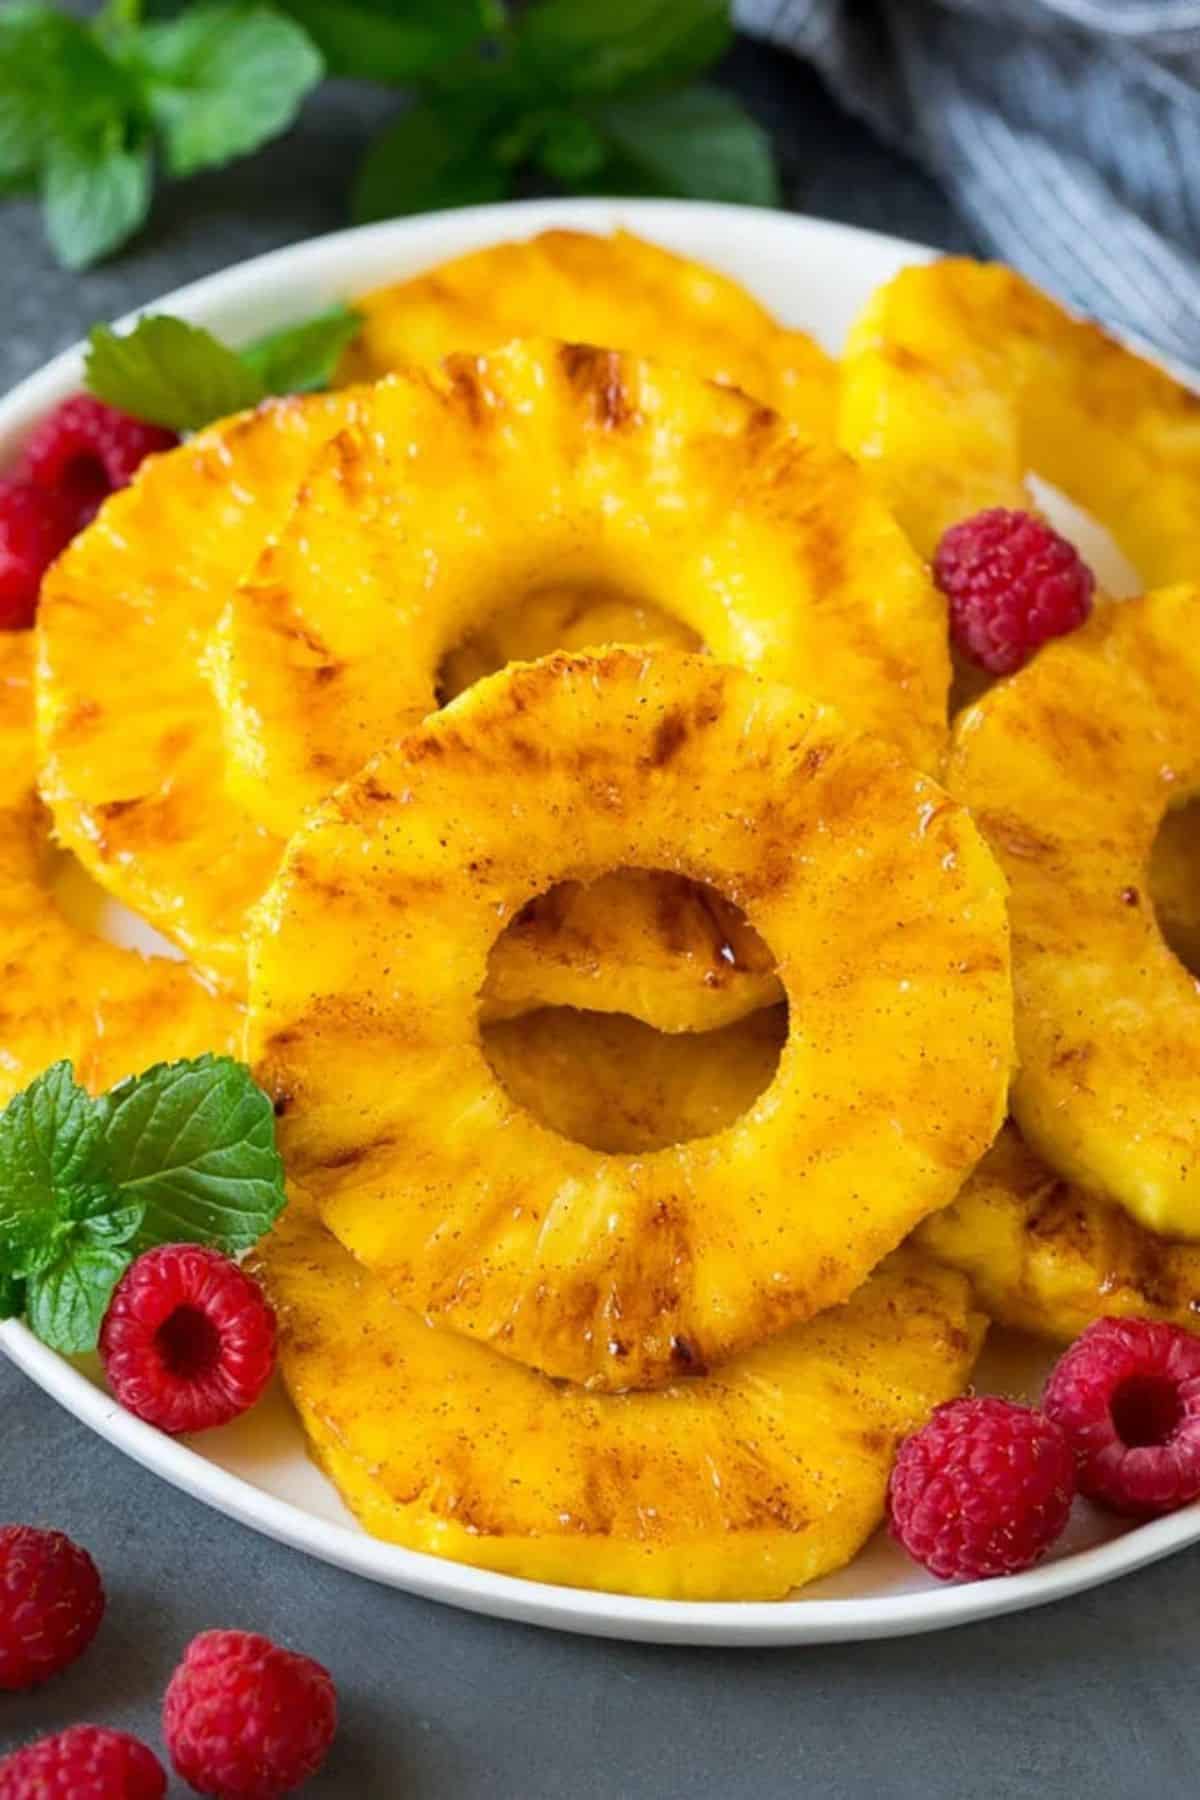 Grilled Pineapples with raspberries on a white plate.